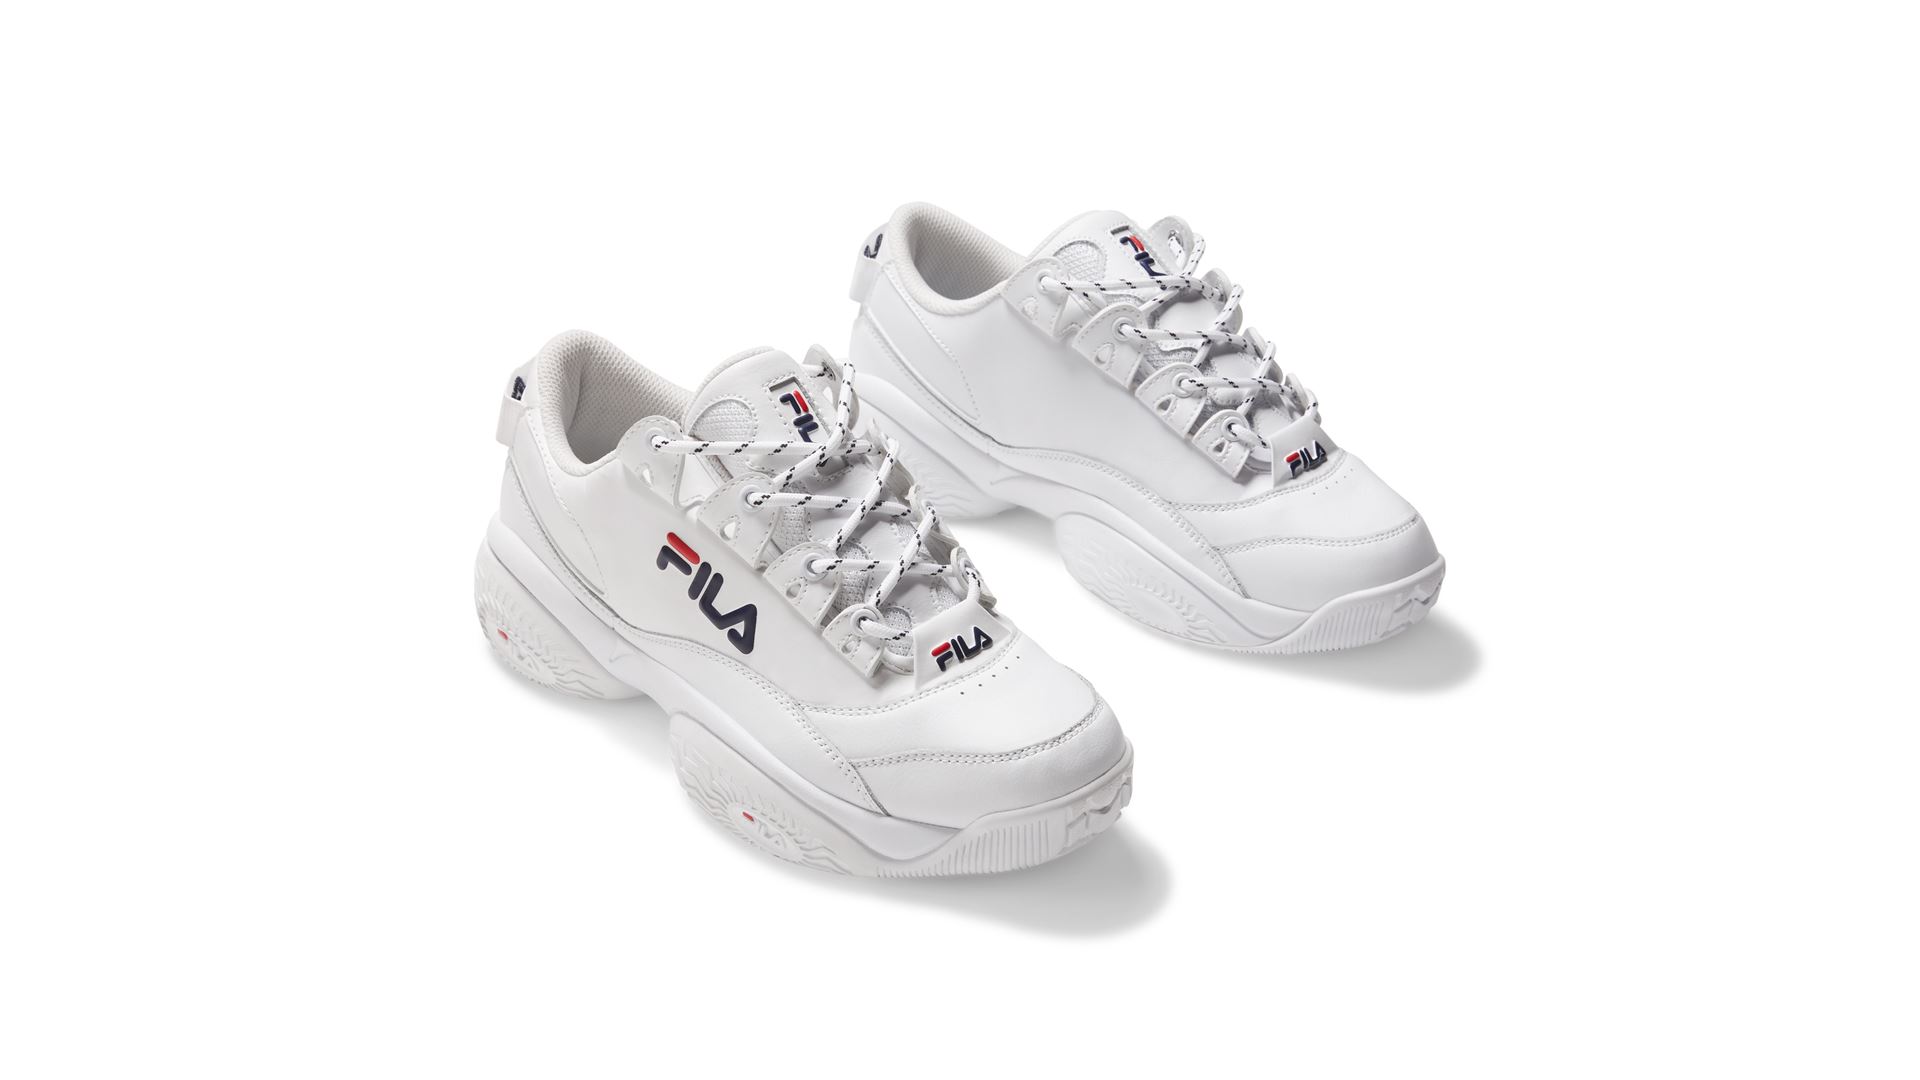 FILA Presents Newest Footwear Silhouette the Provenance